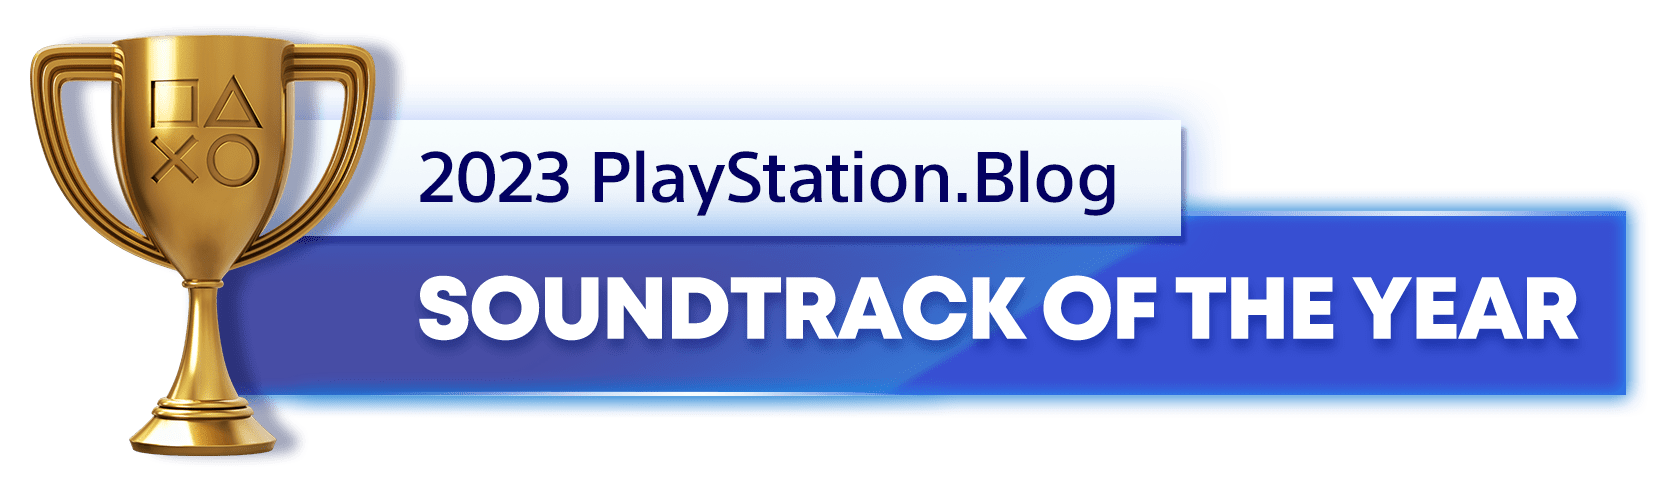 Gold Trophy for the 2023 PlayStation Blog Soundtrack of the Year Winner